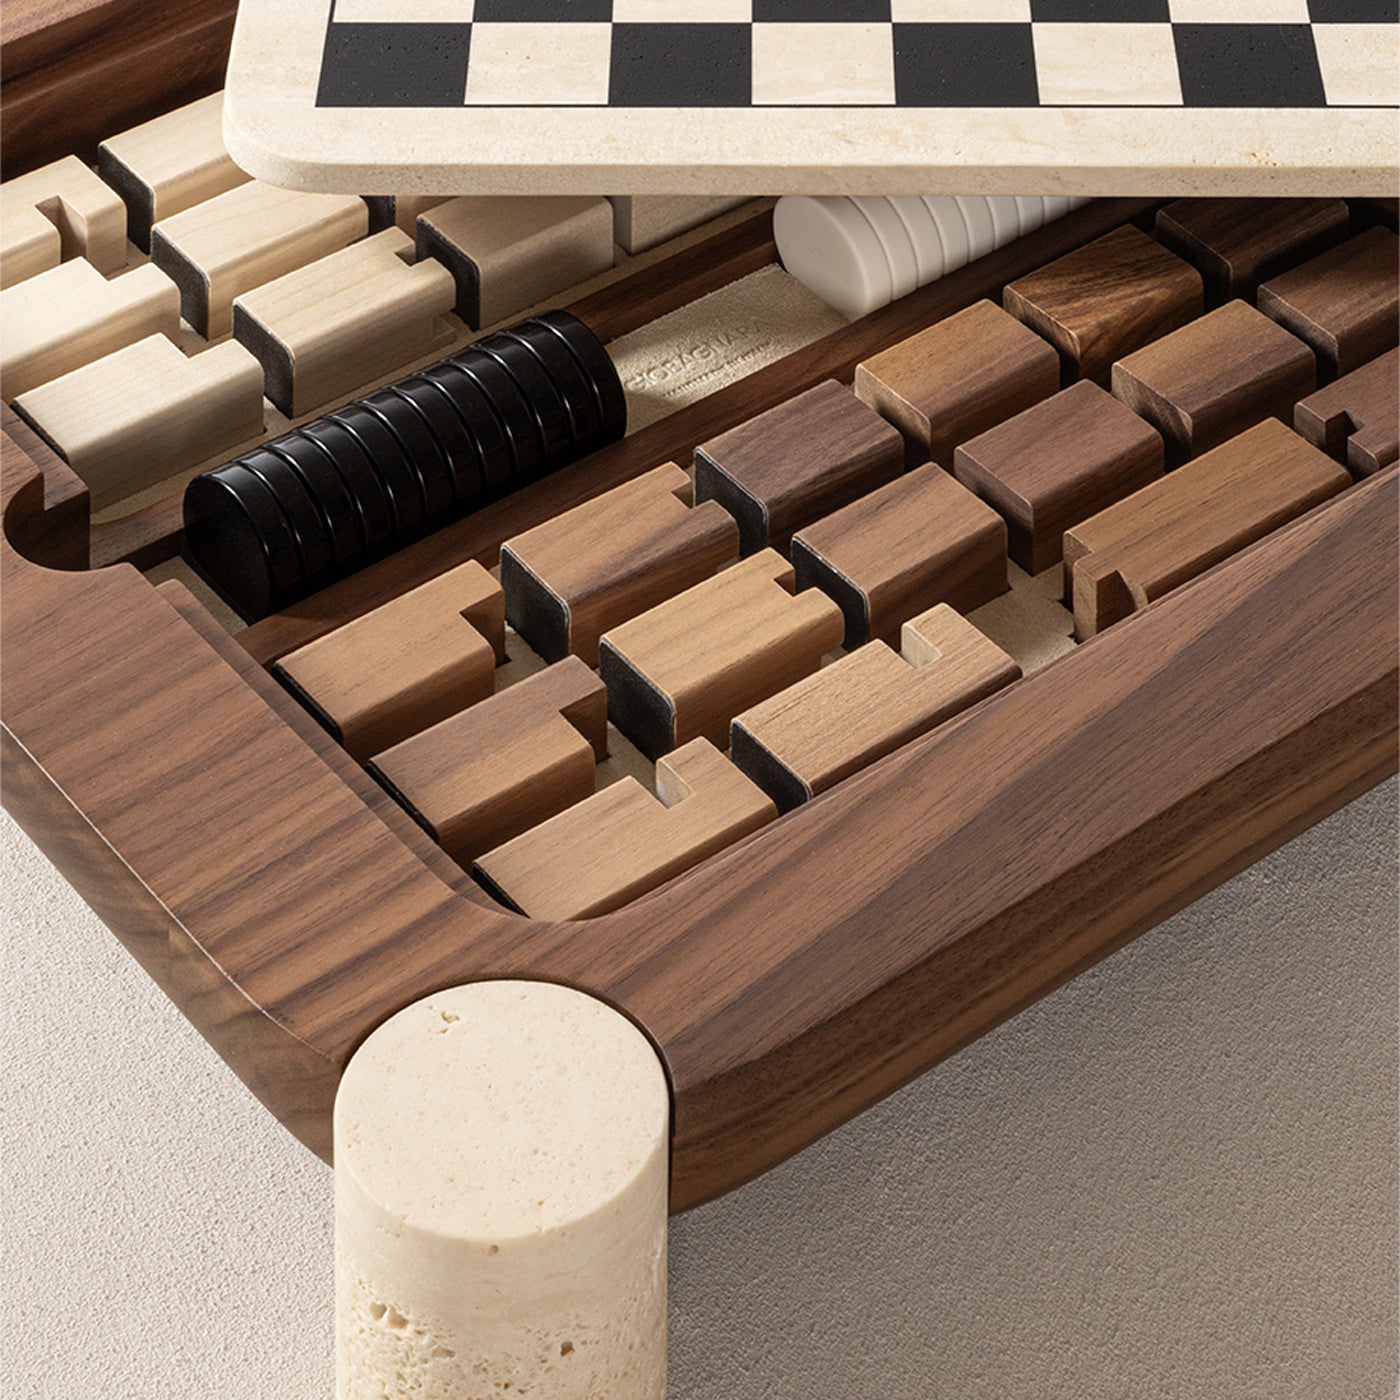 Mocambo Chess Draughts Game Set Design by Simone Fanciullacci - Vue alternative 2